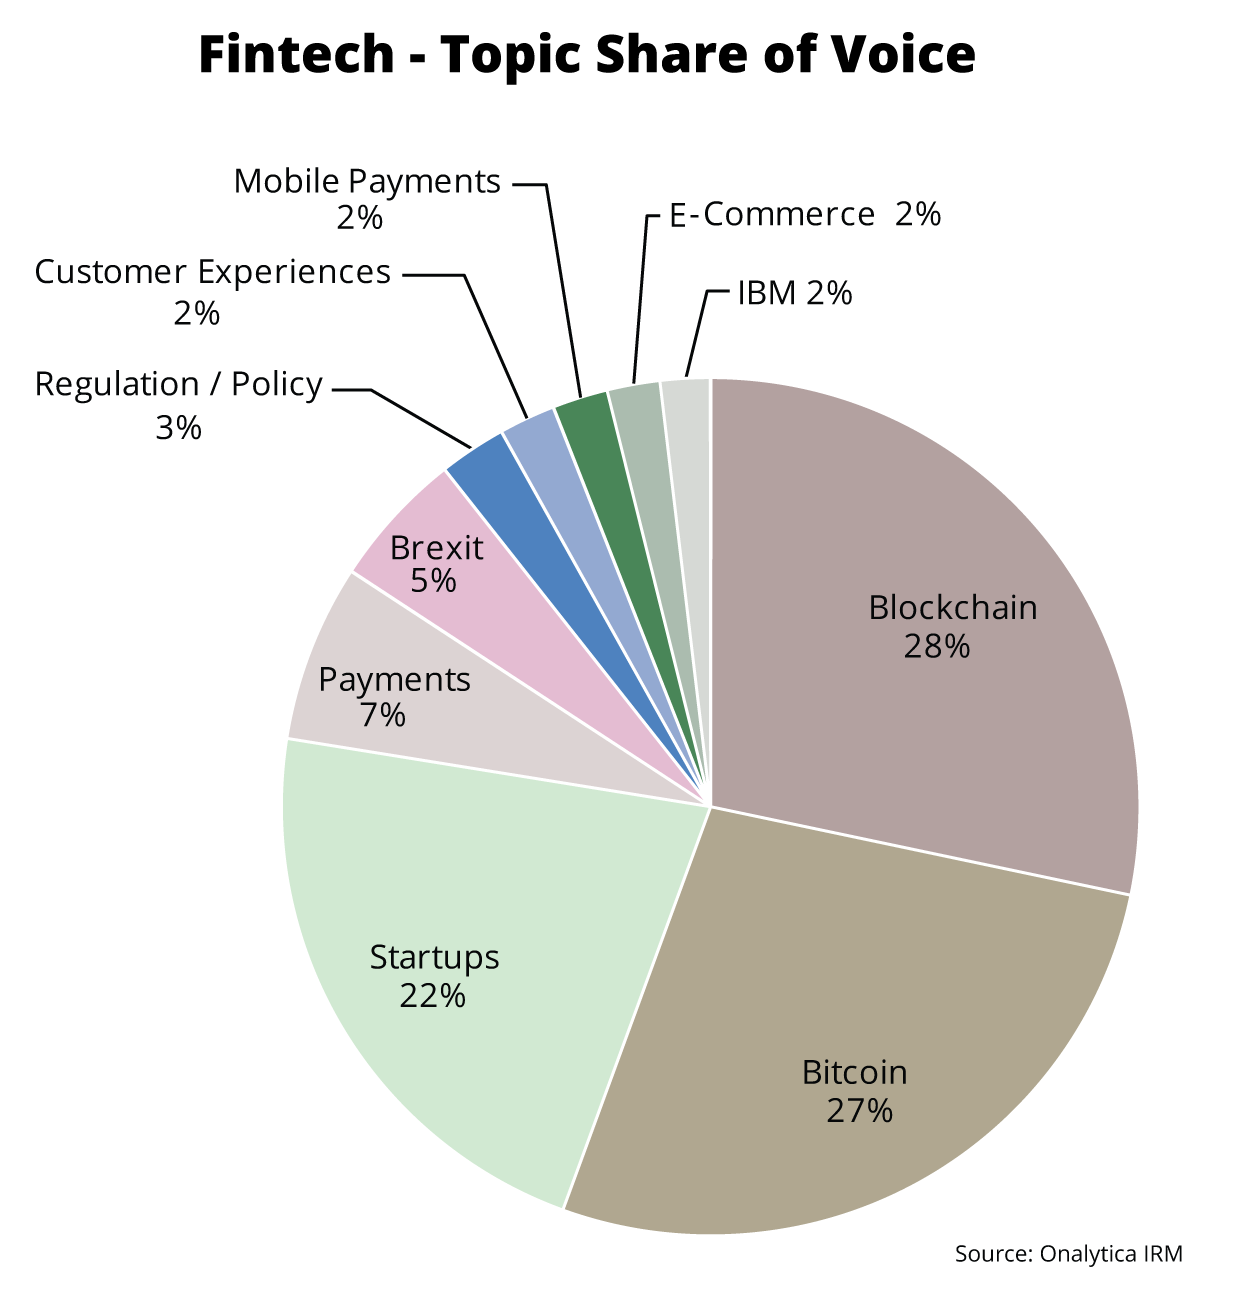 Onalytica - Fintech 2016 top 100 influencers and brands Topic Share of Voice